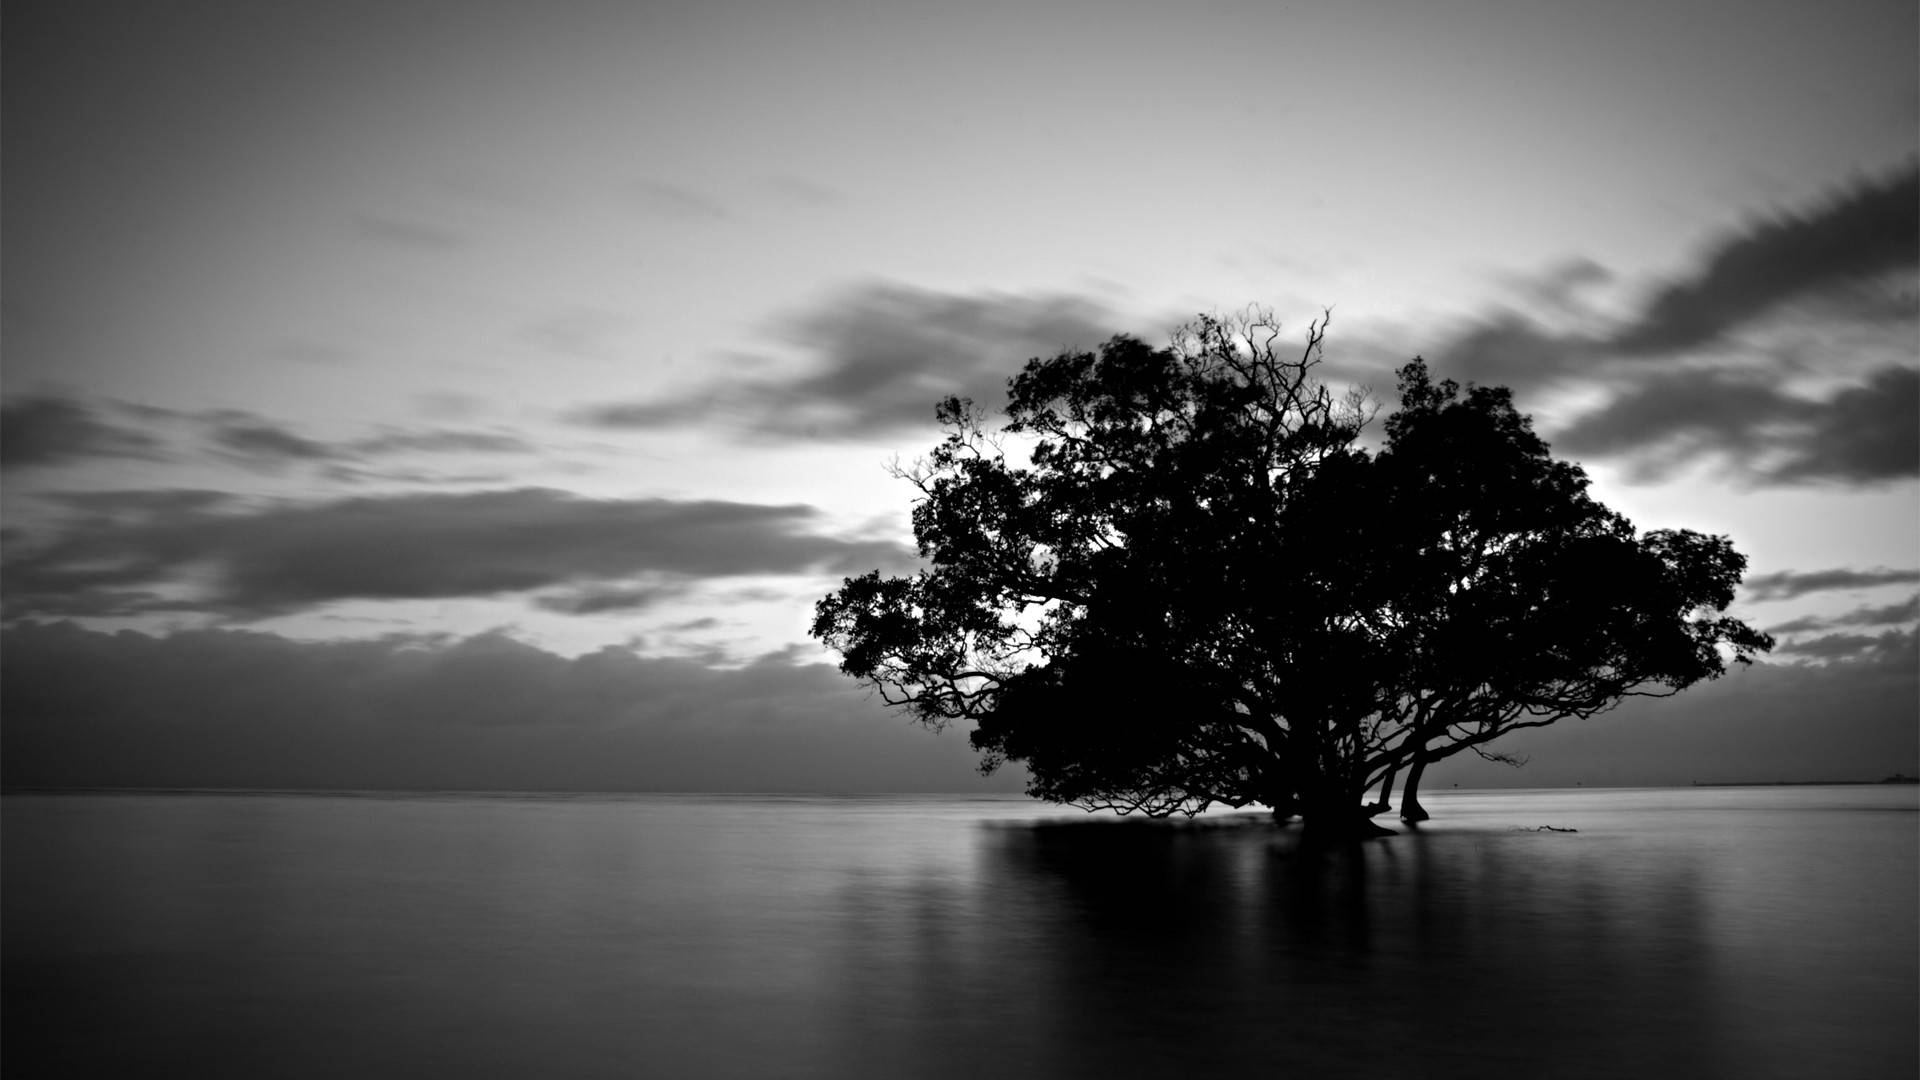 A tree standing in the middle of a body of water. - Lake